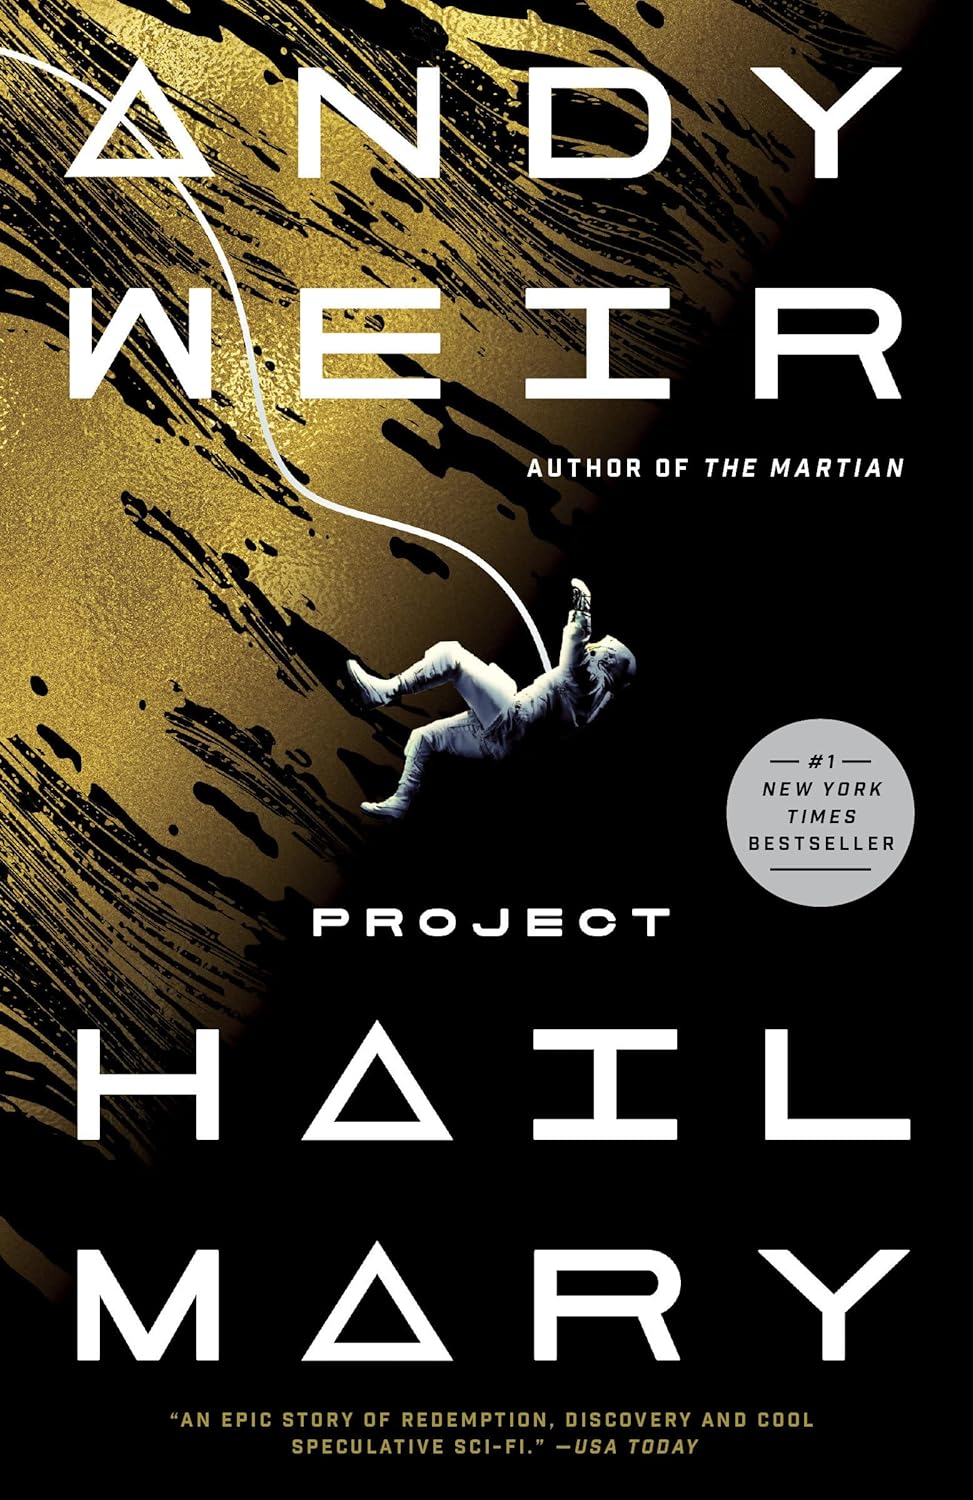 Cover of Project Hail Mary by Andy Weir